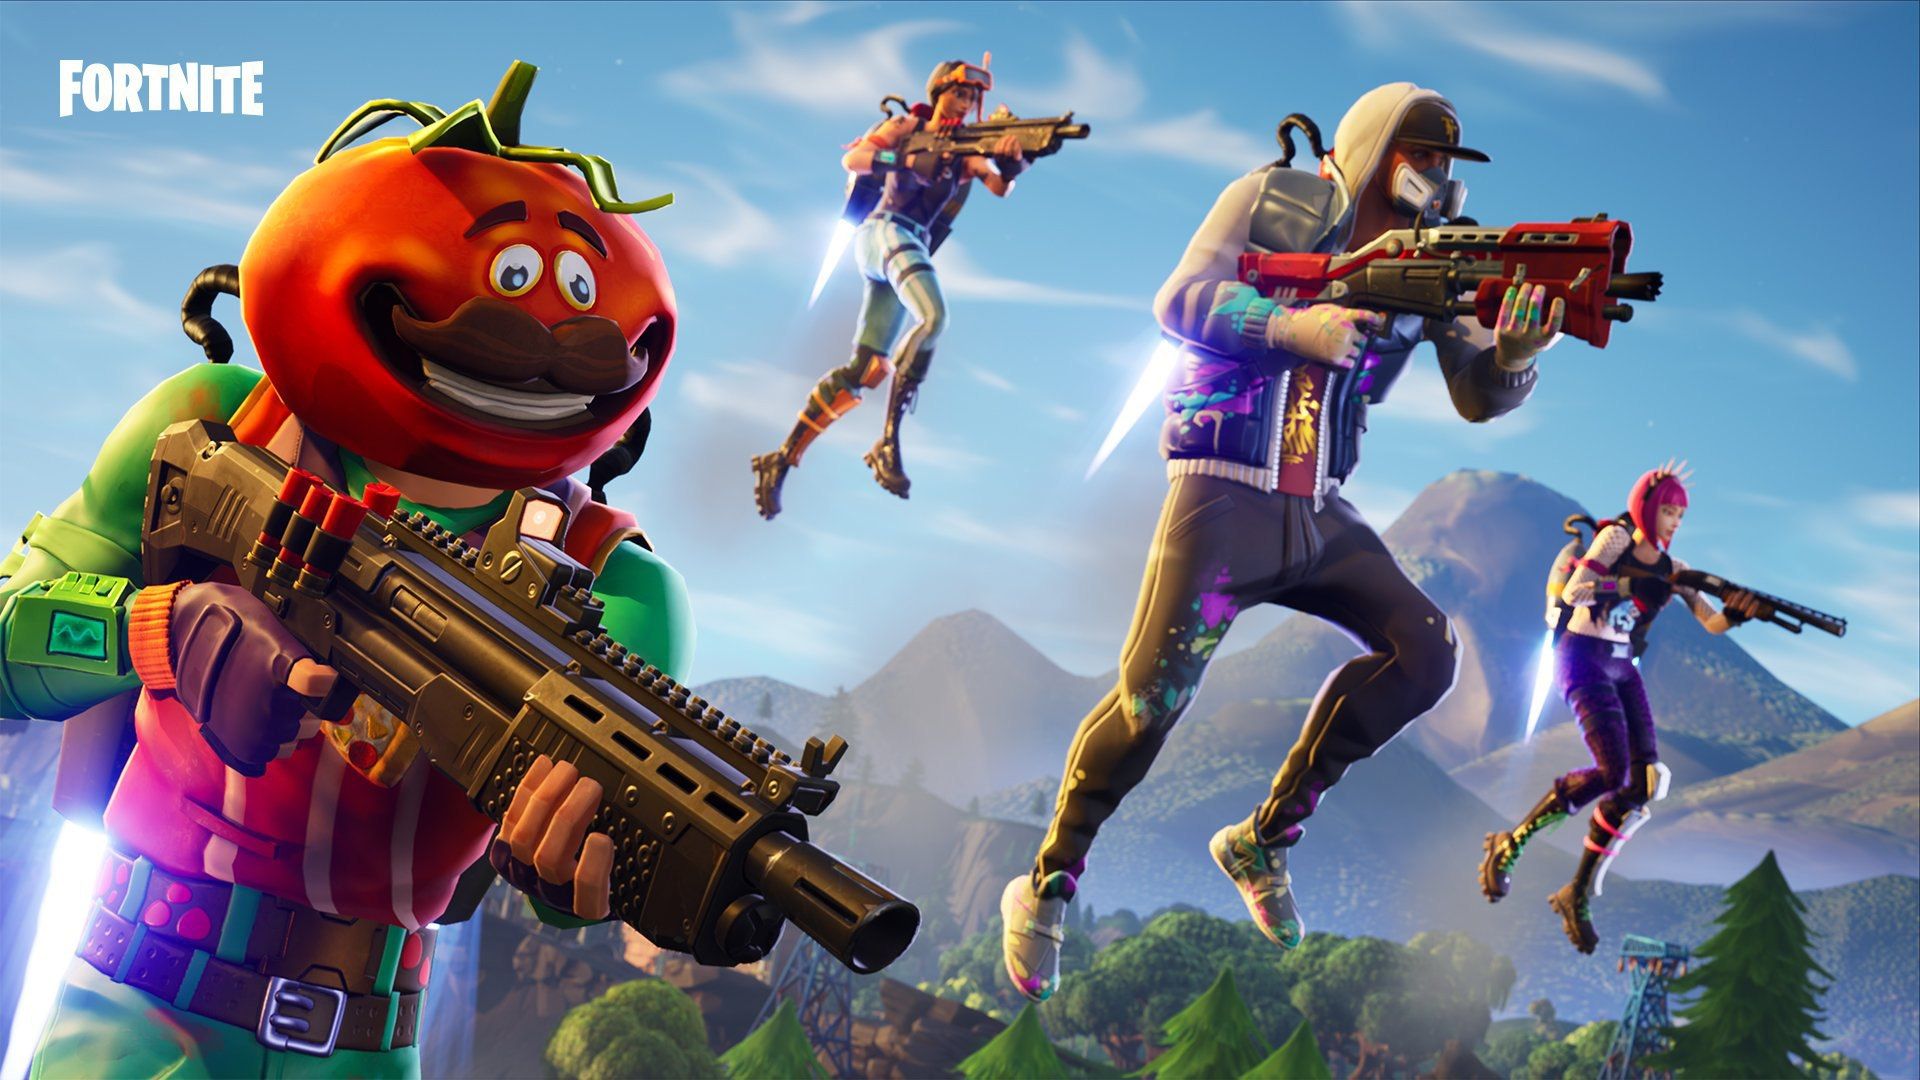 Fortnite was the most played Nintendo Switch game. Dot